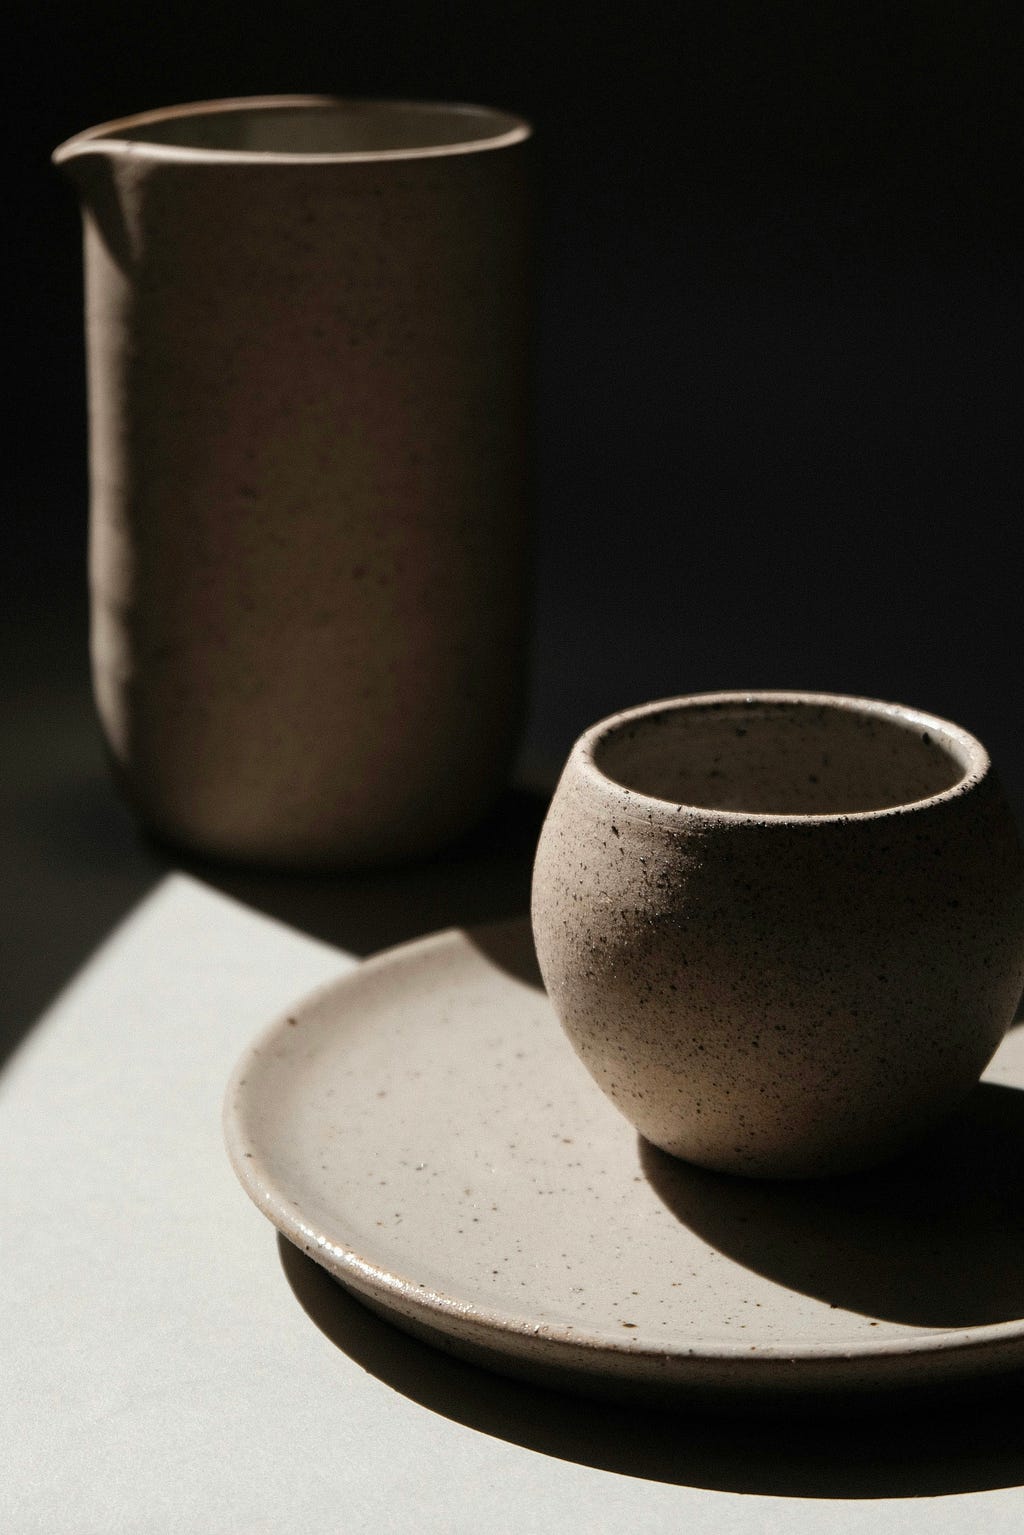 Three stoneware articles — plate, cup, and jug — stand on a surface. The stoneware articles and surface are partly lit by sunlight.